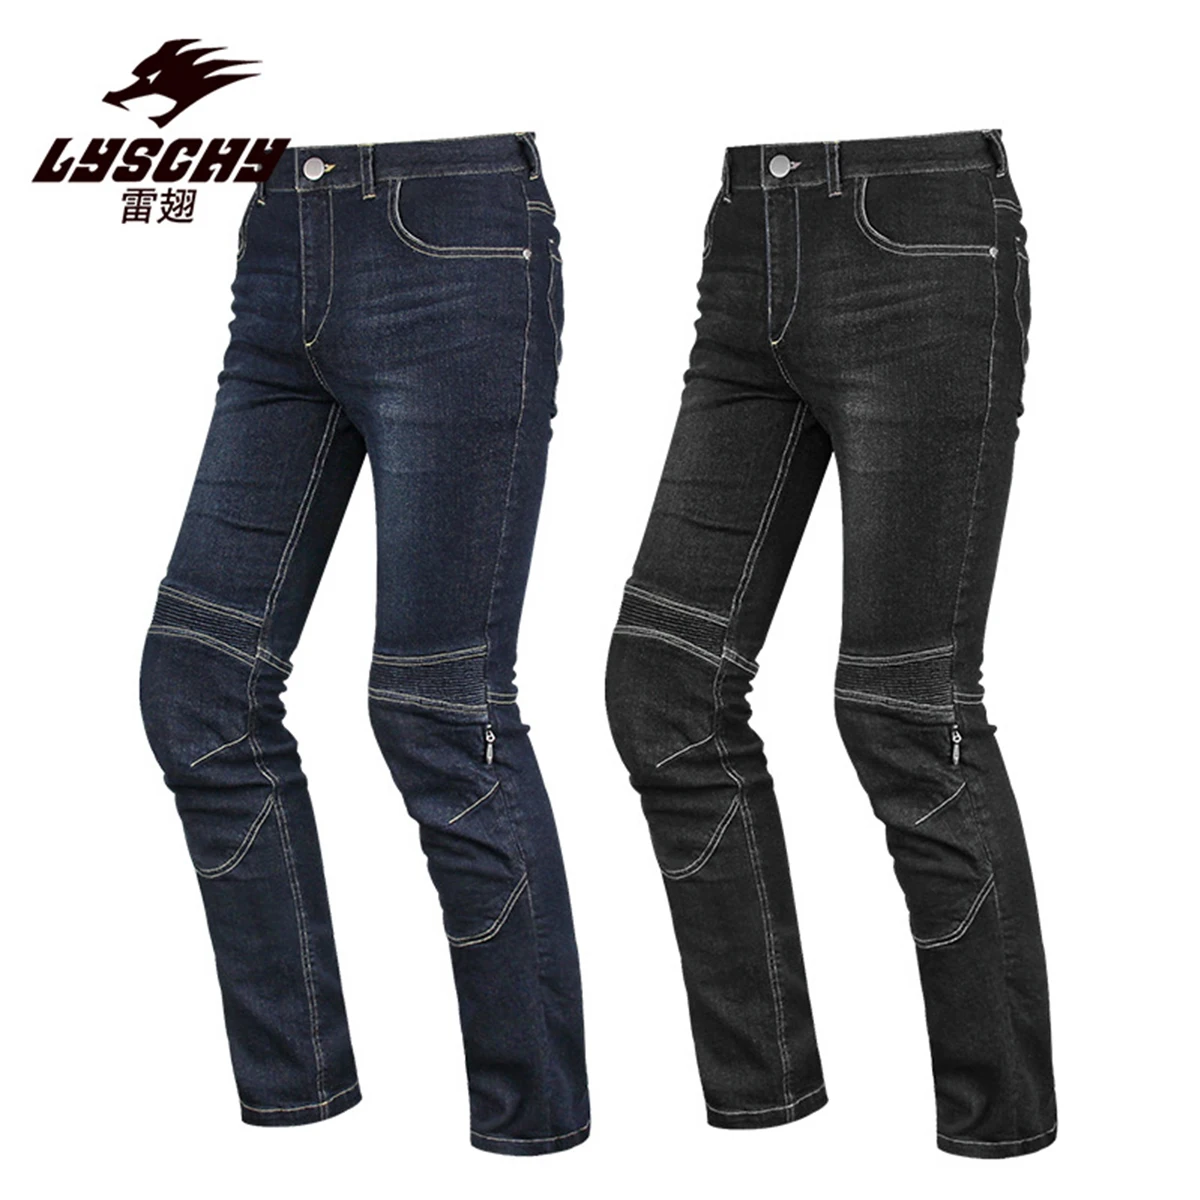 Lyschy Motorcycle Jeans Mens Riding Pants Protection Summer Motocross Protective Pantalon Removable CE Trousers